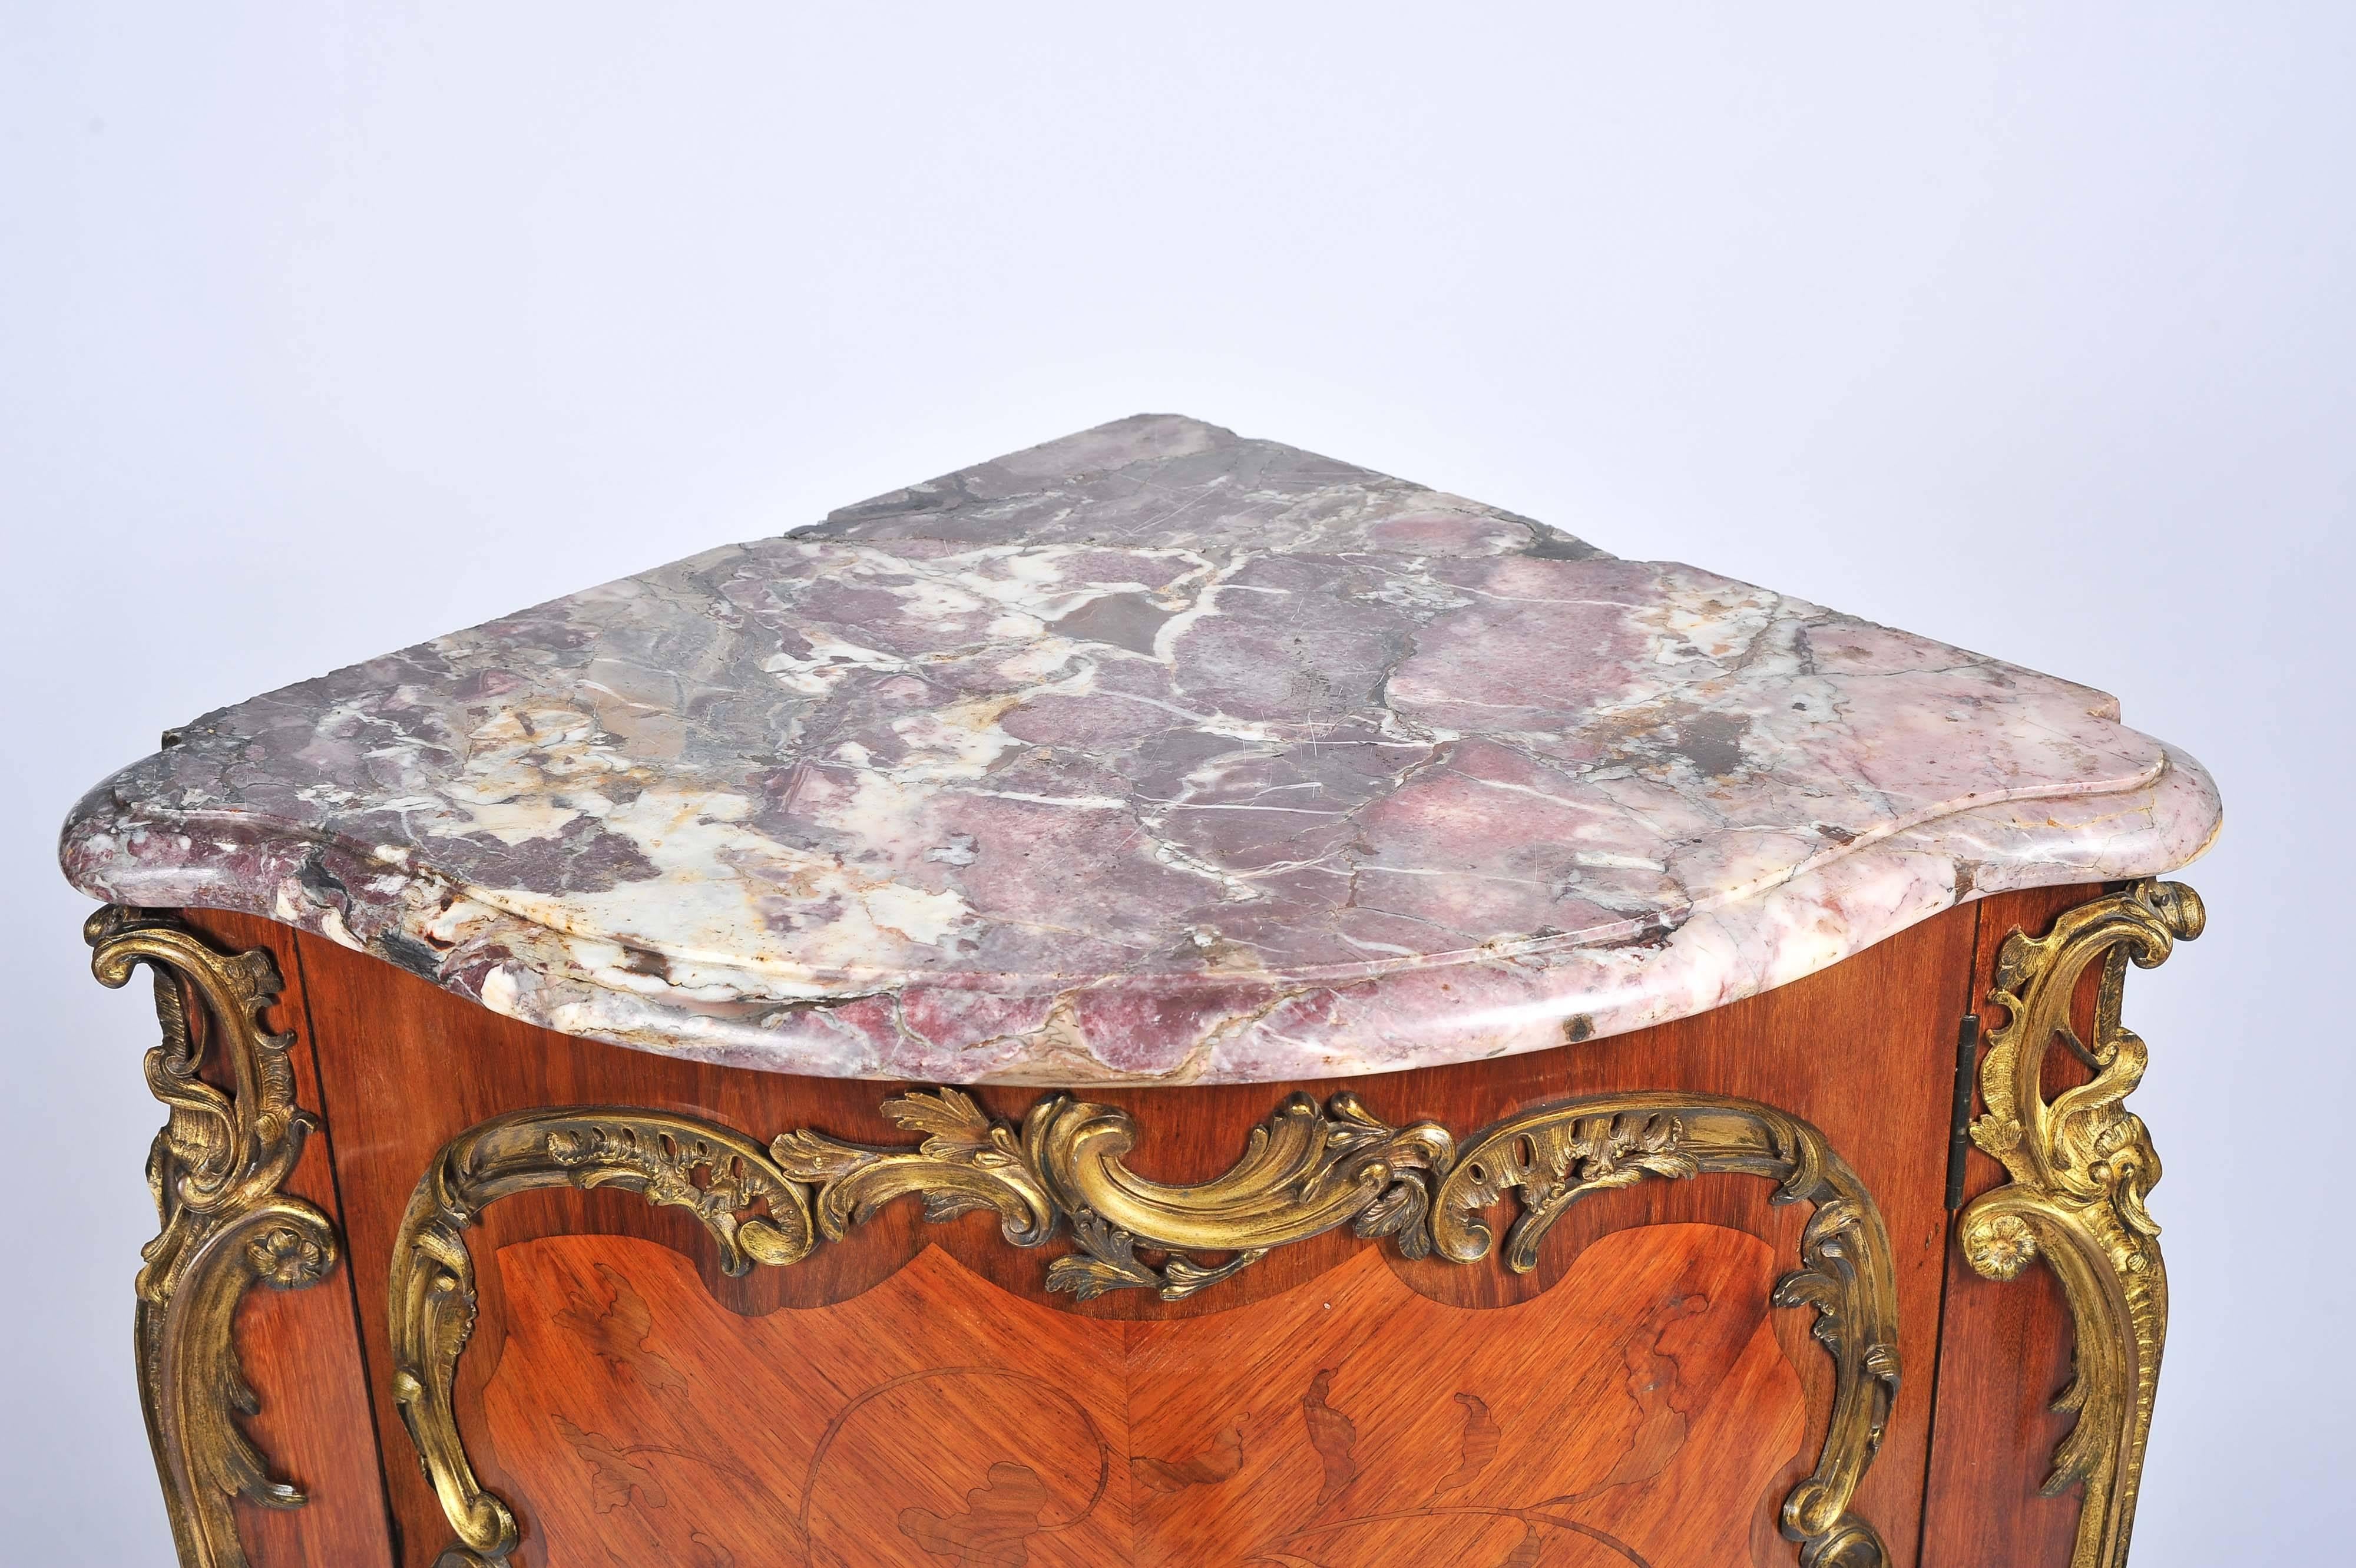 A good quality French, 19th century, kingwood marquetry inlaid corner cabinet, having its original Breccia marble top, the inlaid decoration of flowers and gilded ormolu mounts. The bombe fronted door opening to reveal a shelf within and raised on